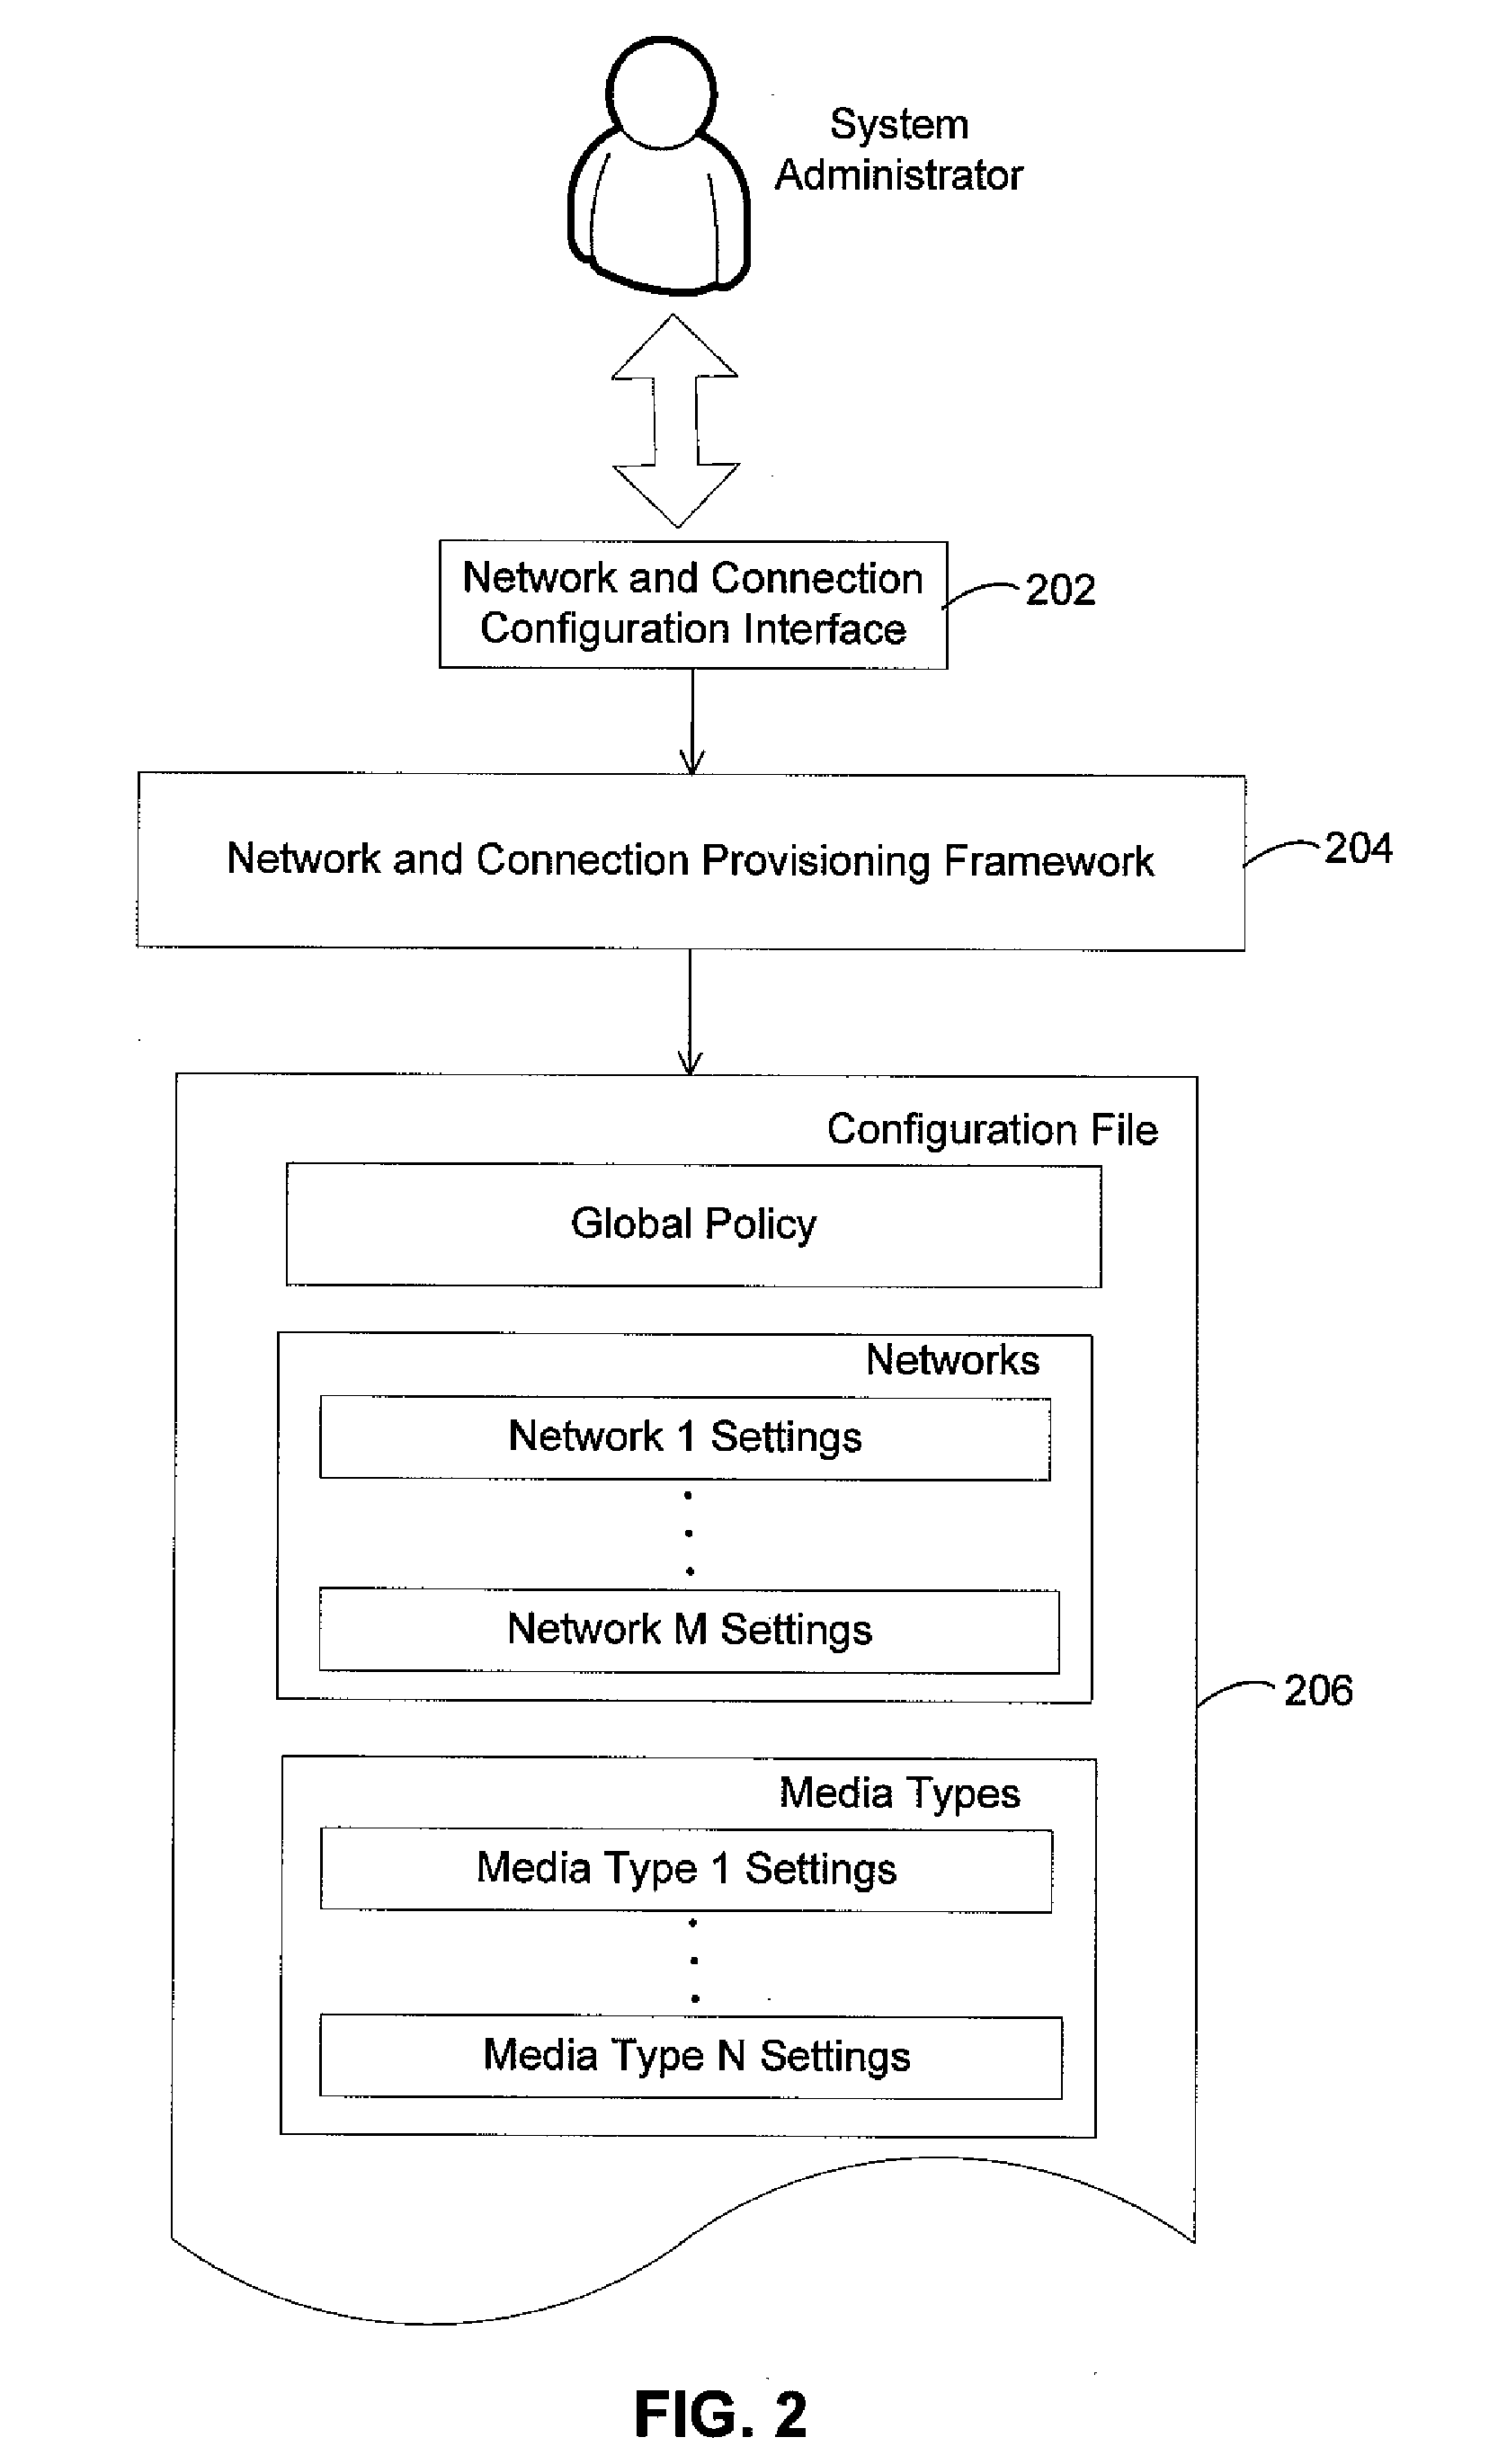 Unified interface for configuring multiple networking technologies